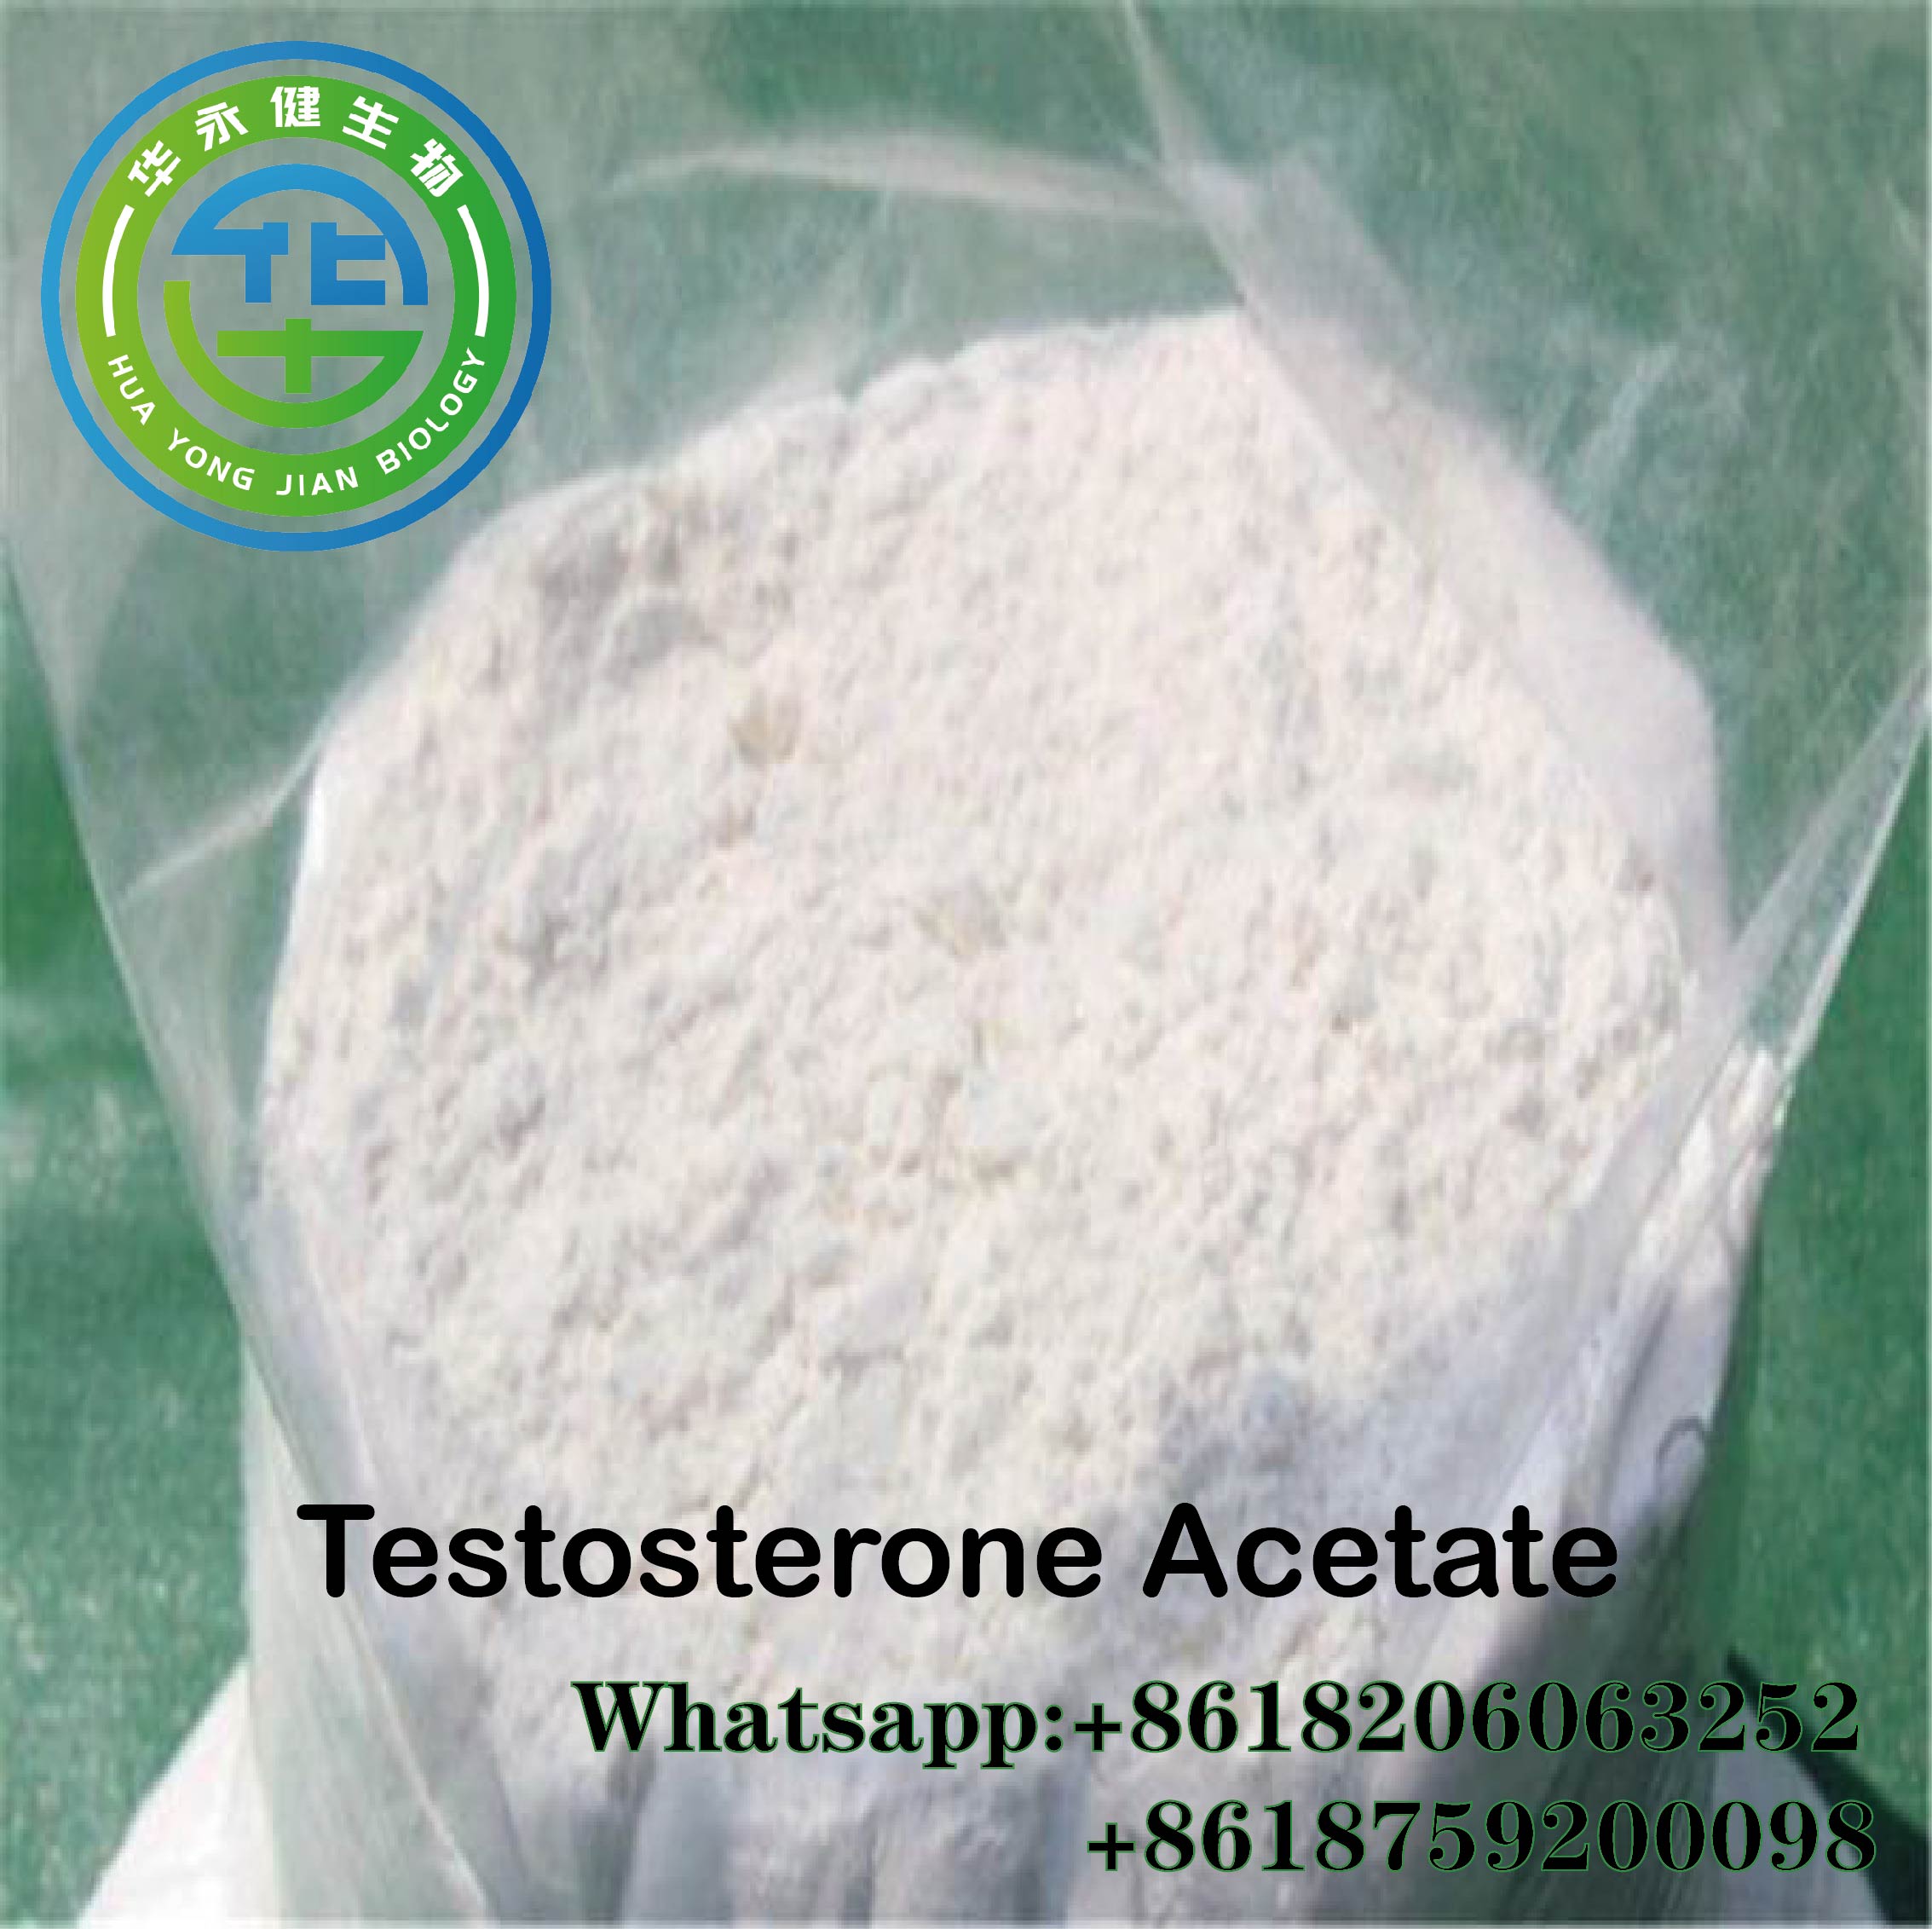 Bodybuilding with Testosterone Acetate for Muscle Growth Steroids Test A Raw Powder CasNO.1045-69-8